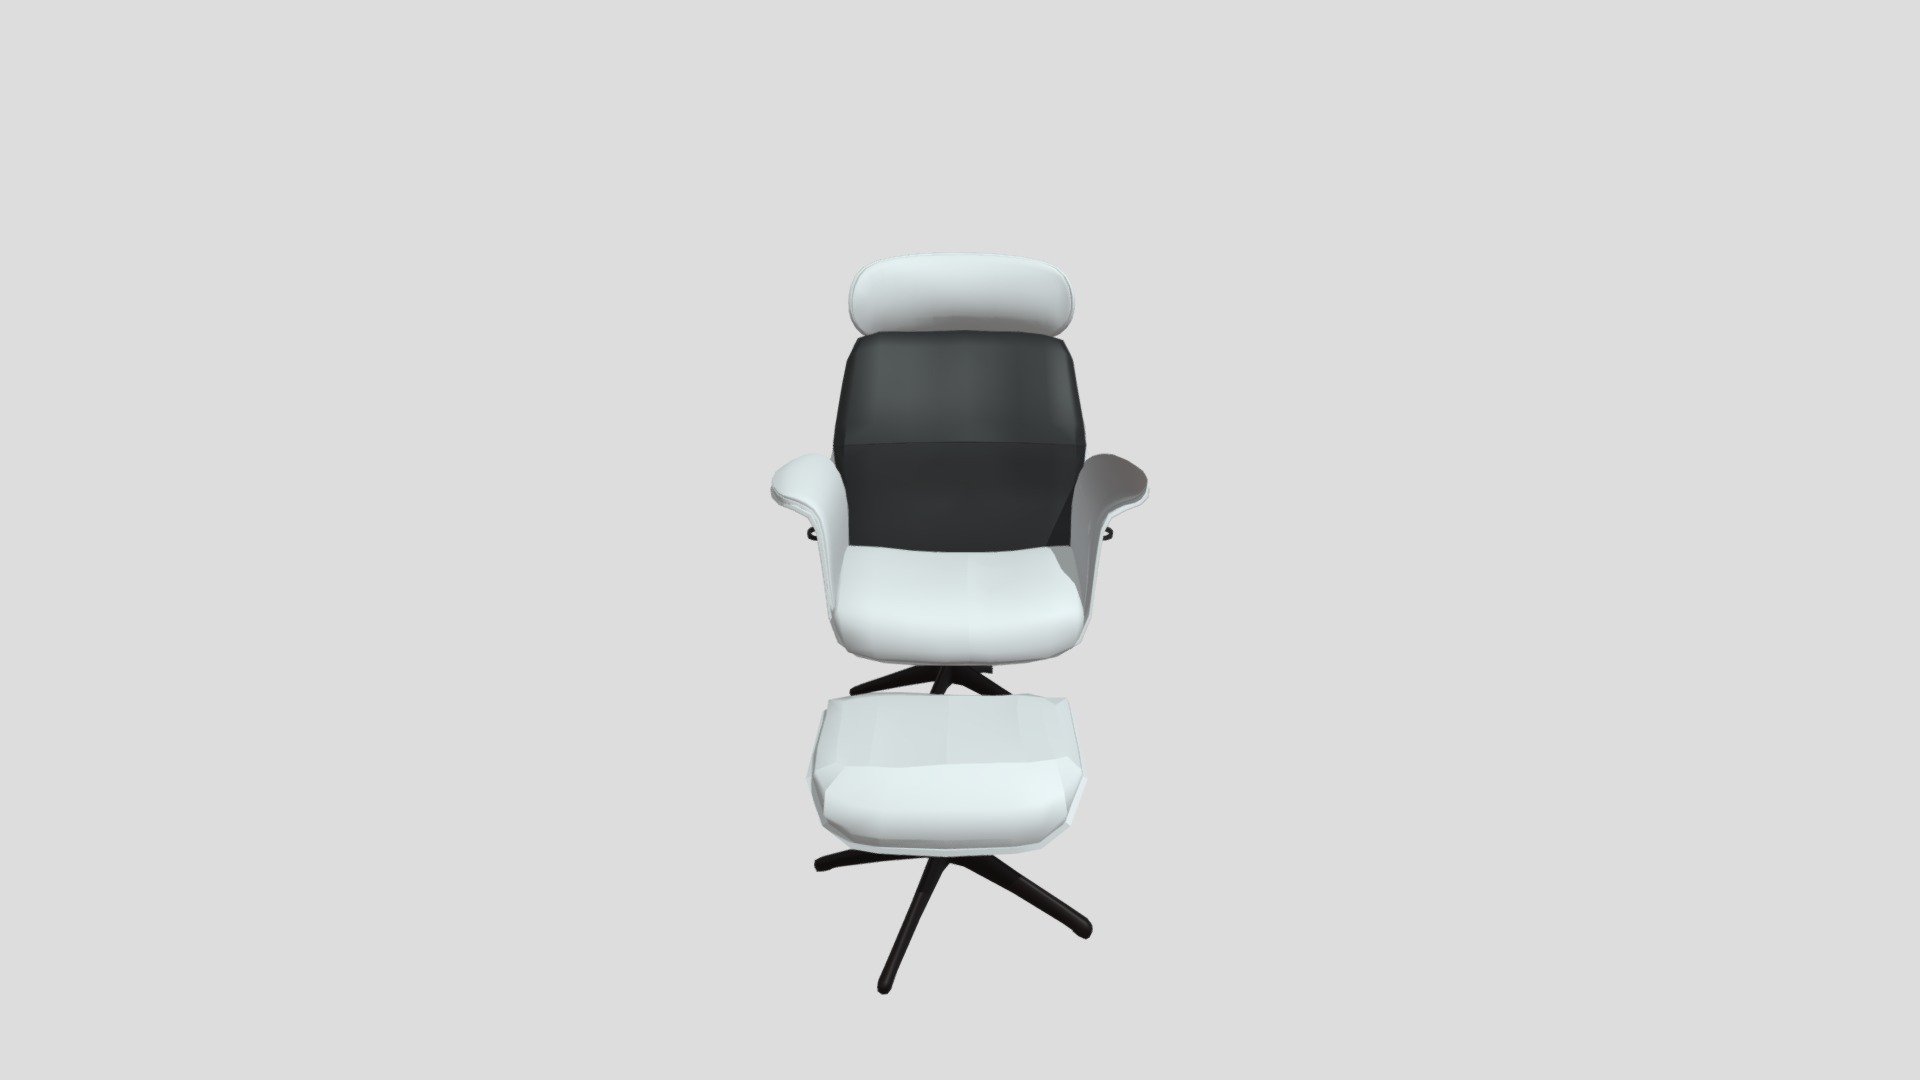 3D Chair model with foot rest